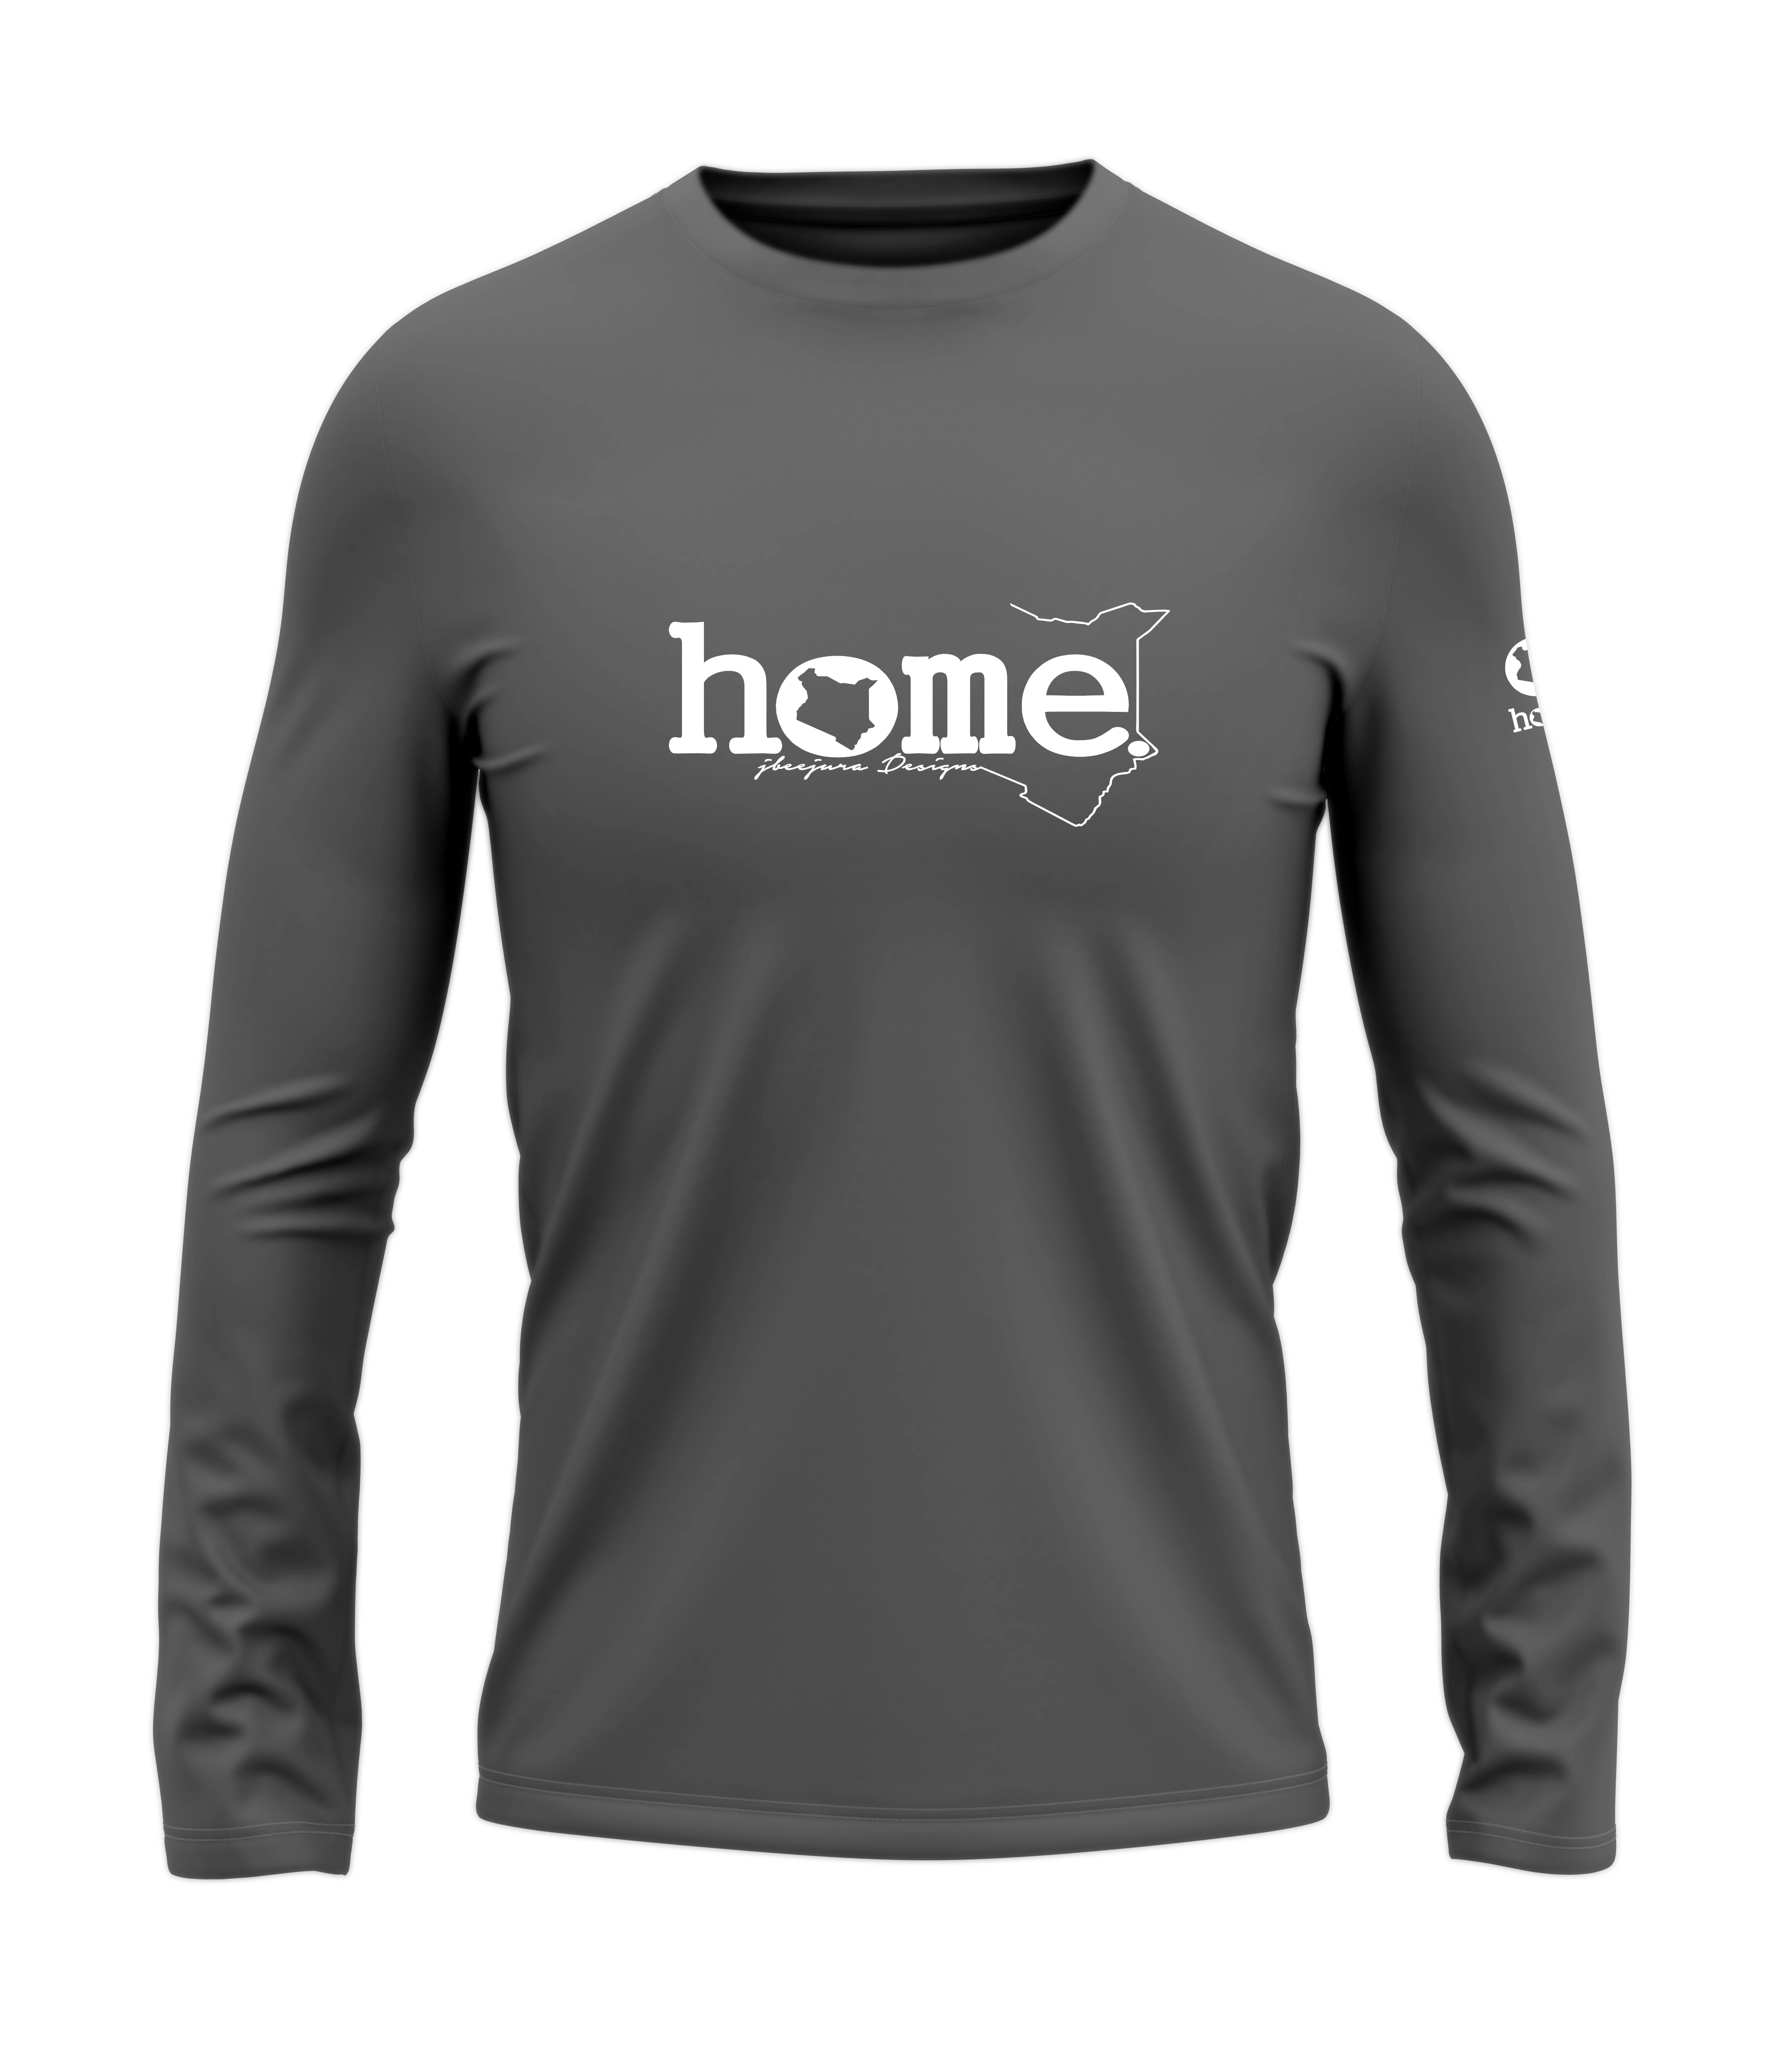 home_254 LONG-SLEEVED SAGE T-SHIRT WITH A WHITE CLASSIC WORDS PRINT – COTTON PLUS FABRIC